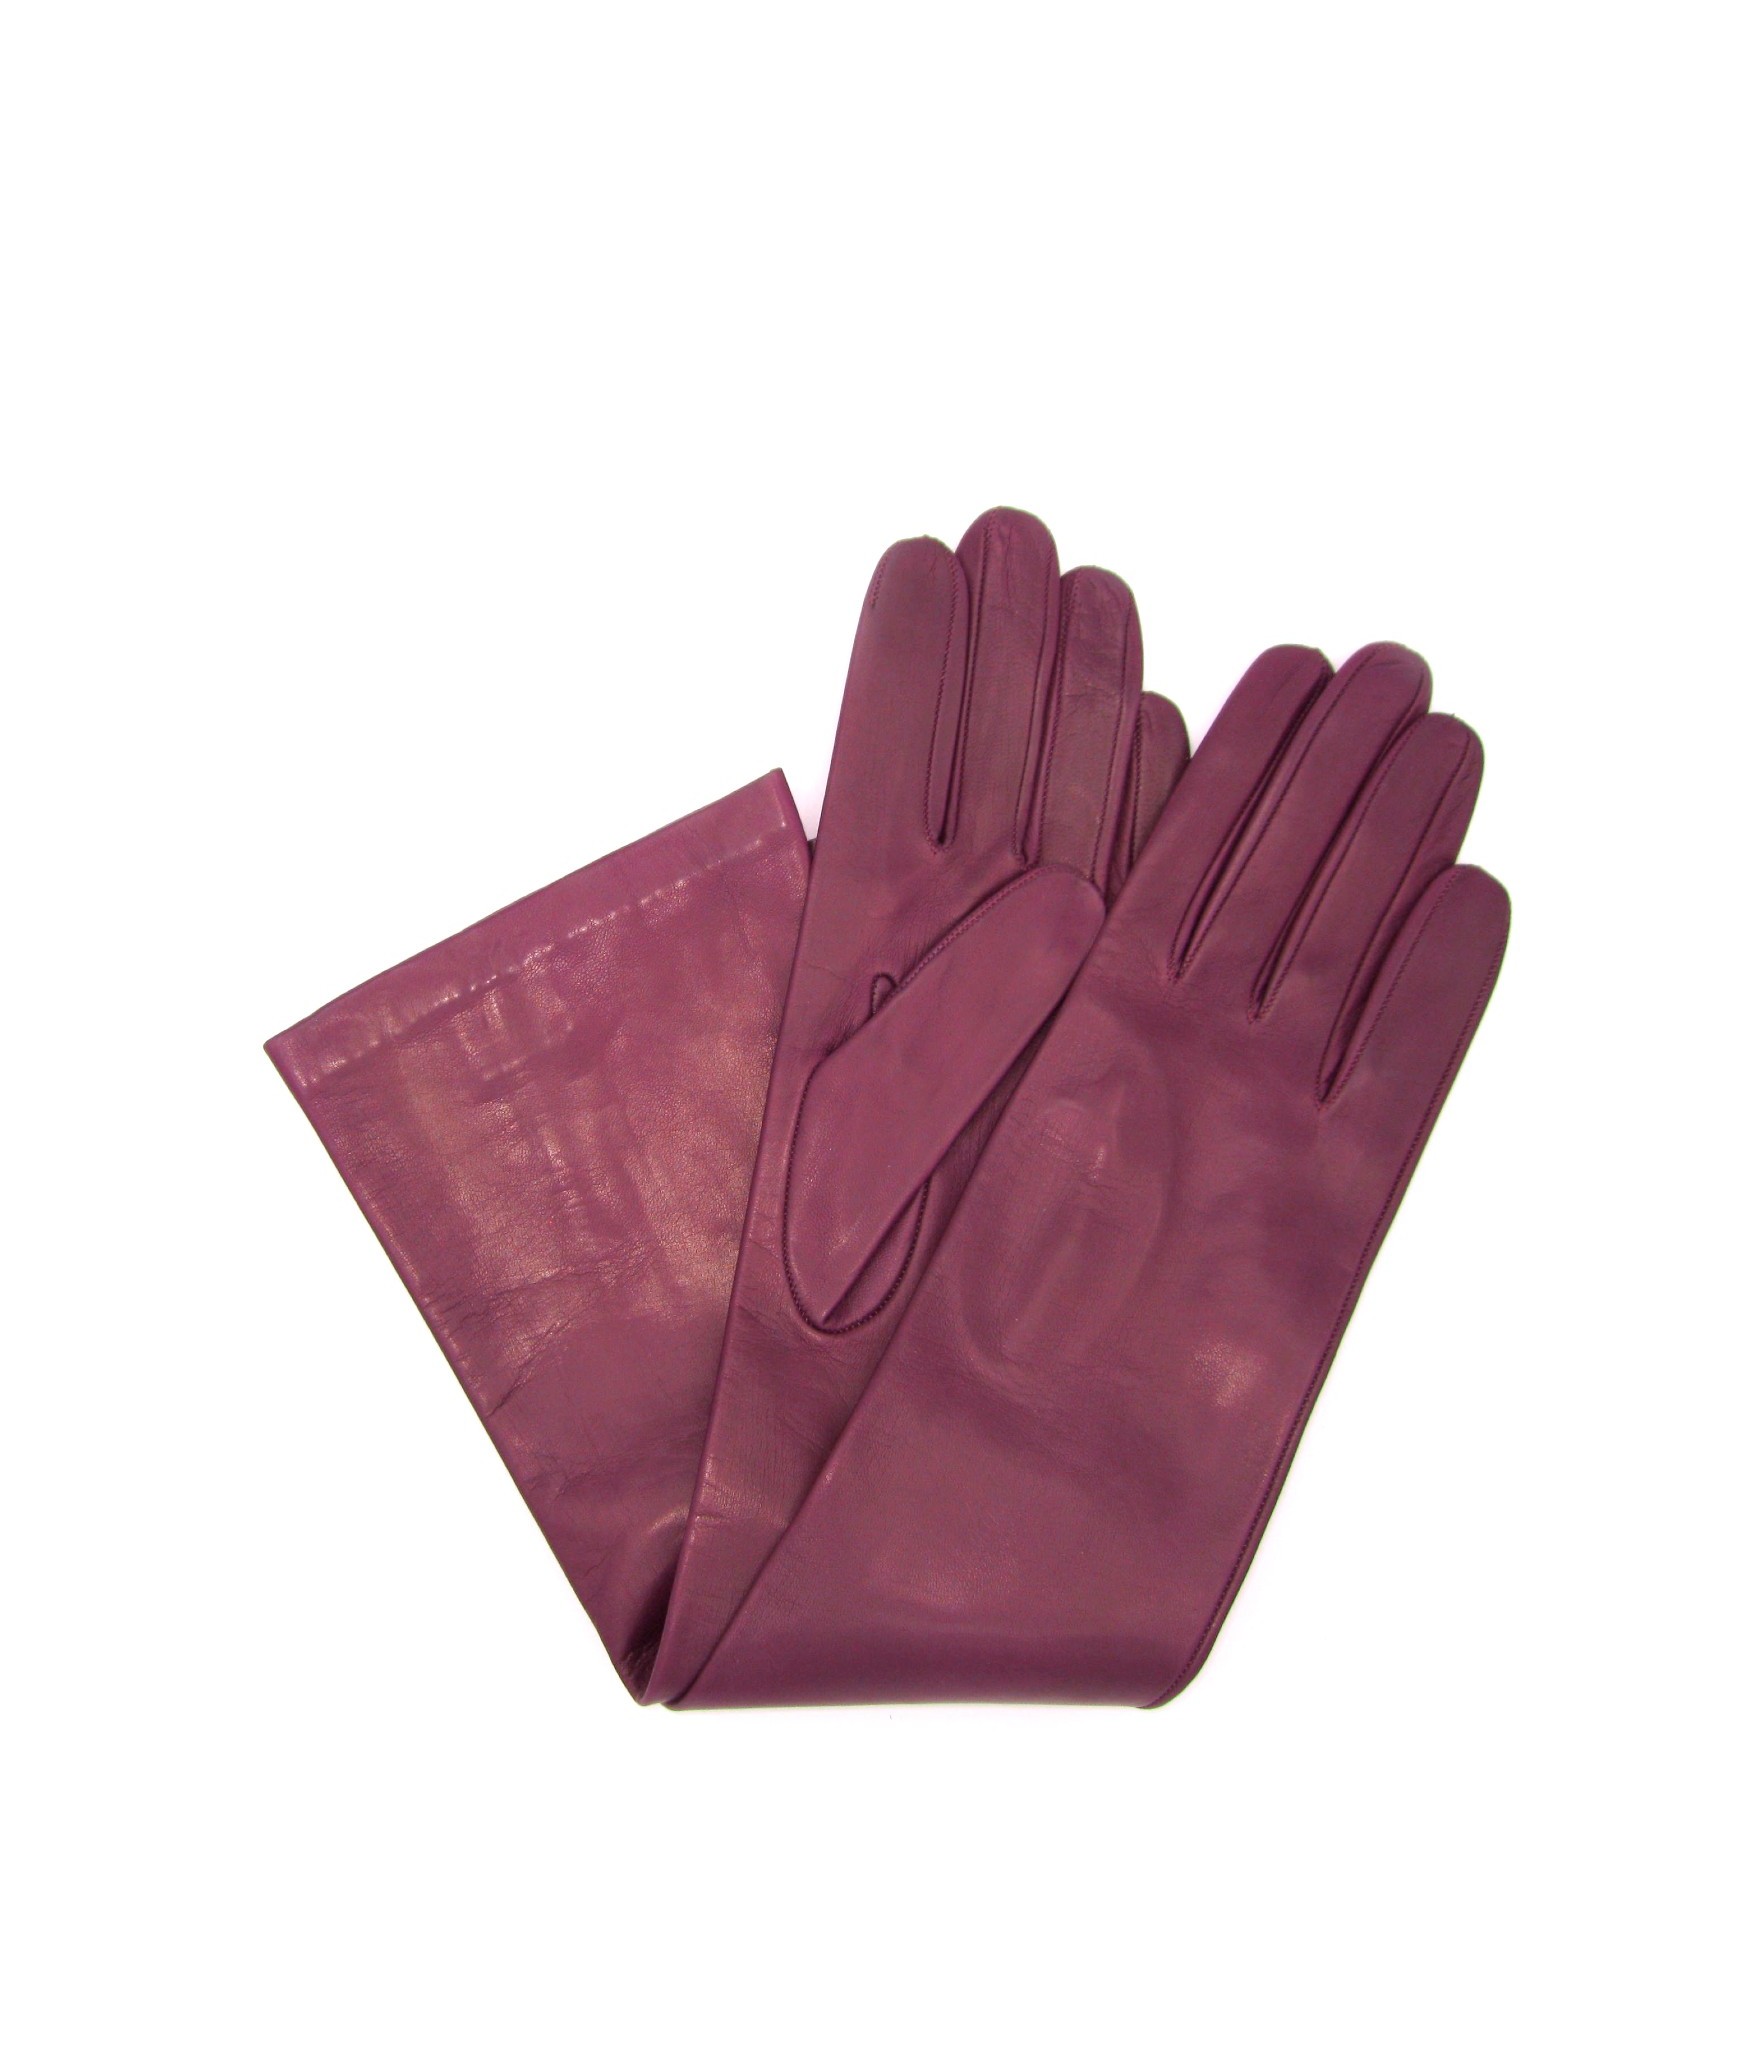 Nappa leather gloves 10bt silk lined    Purple